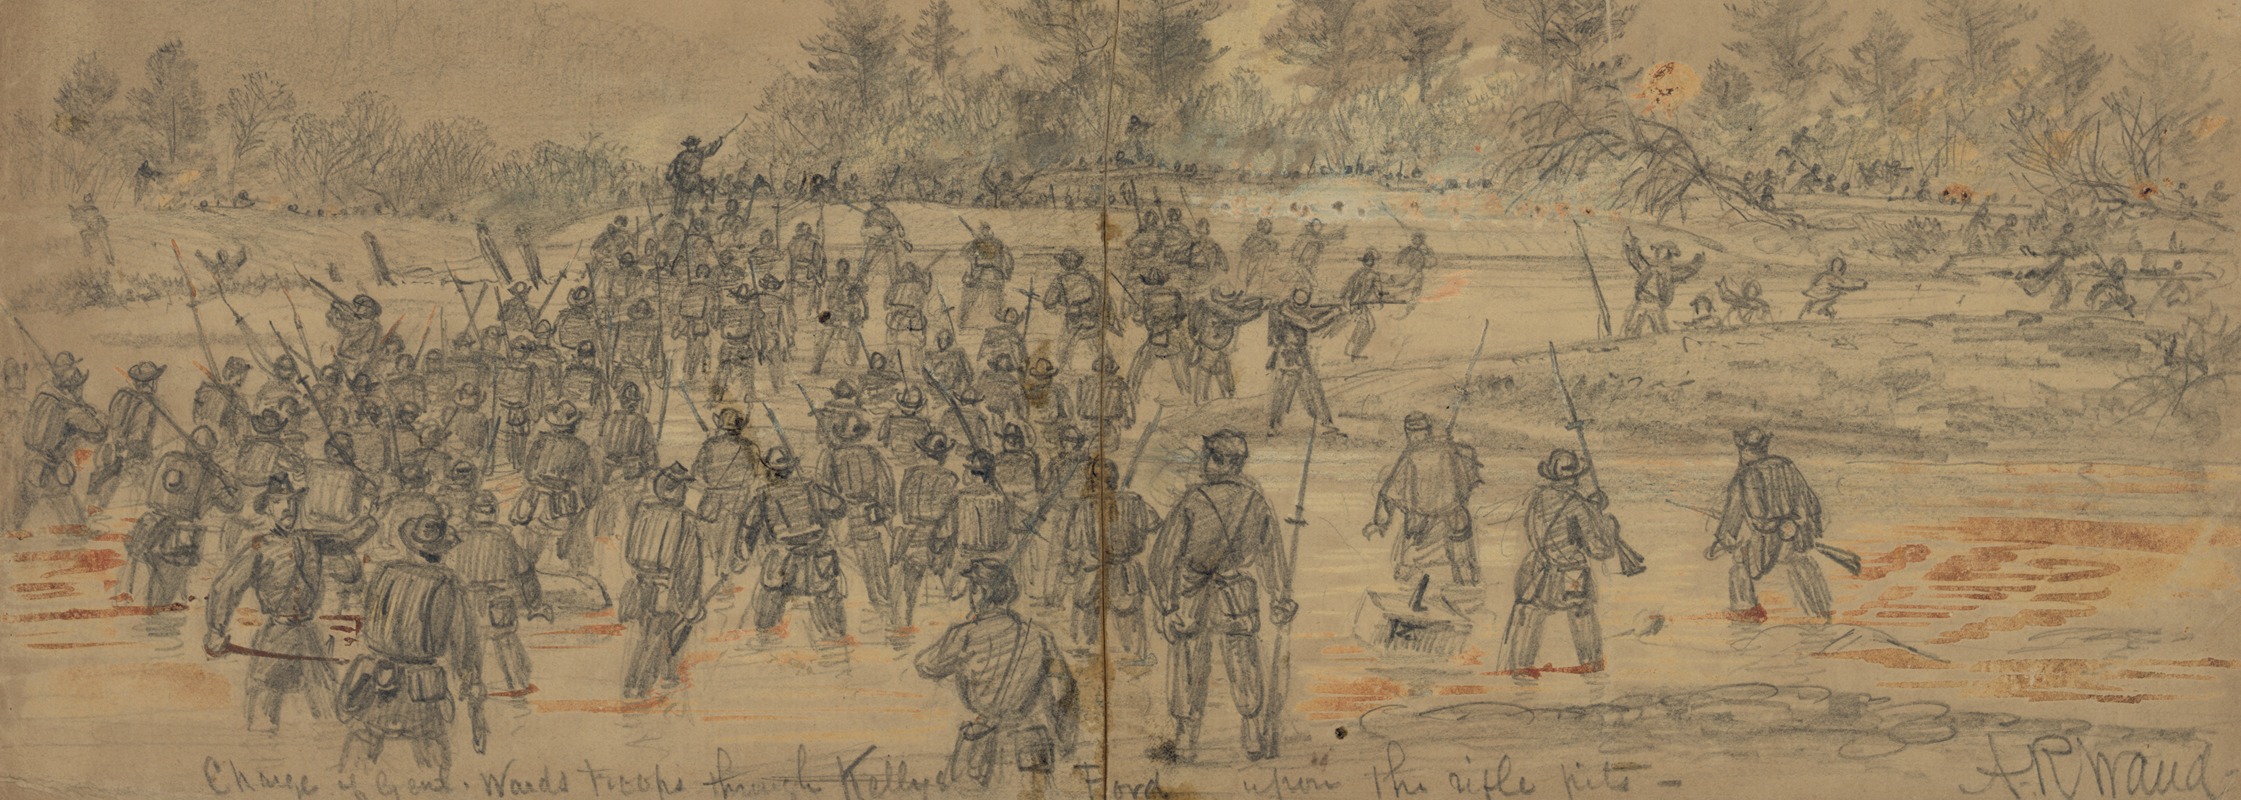 Alfred Rudolph Waud - Charge of Genl. Wards troops through Kellys Ford upon the rifle pits